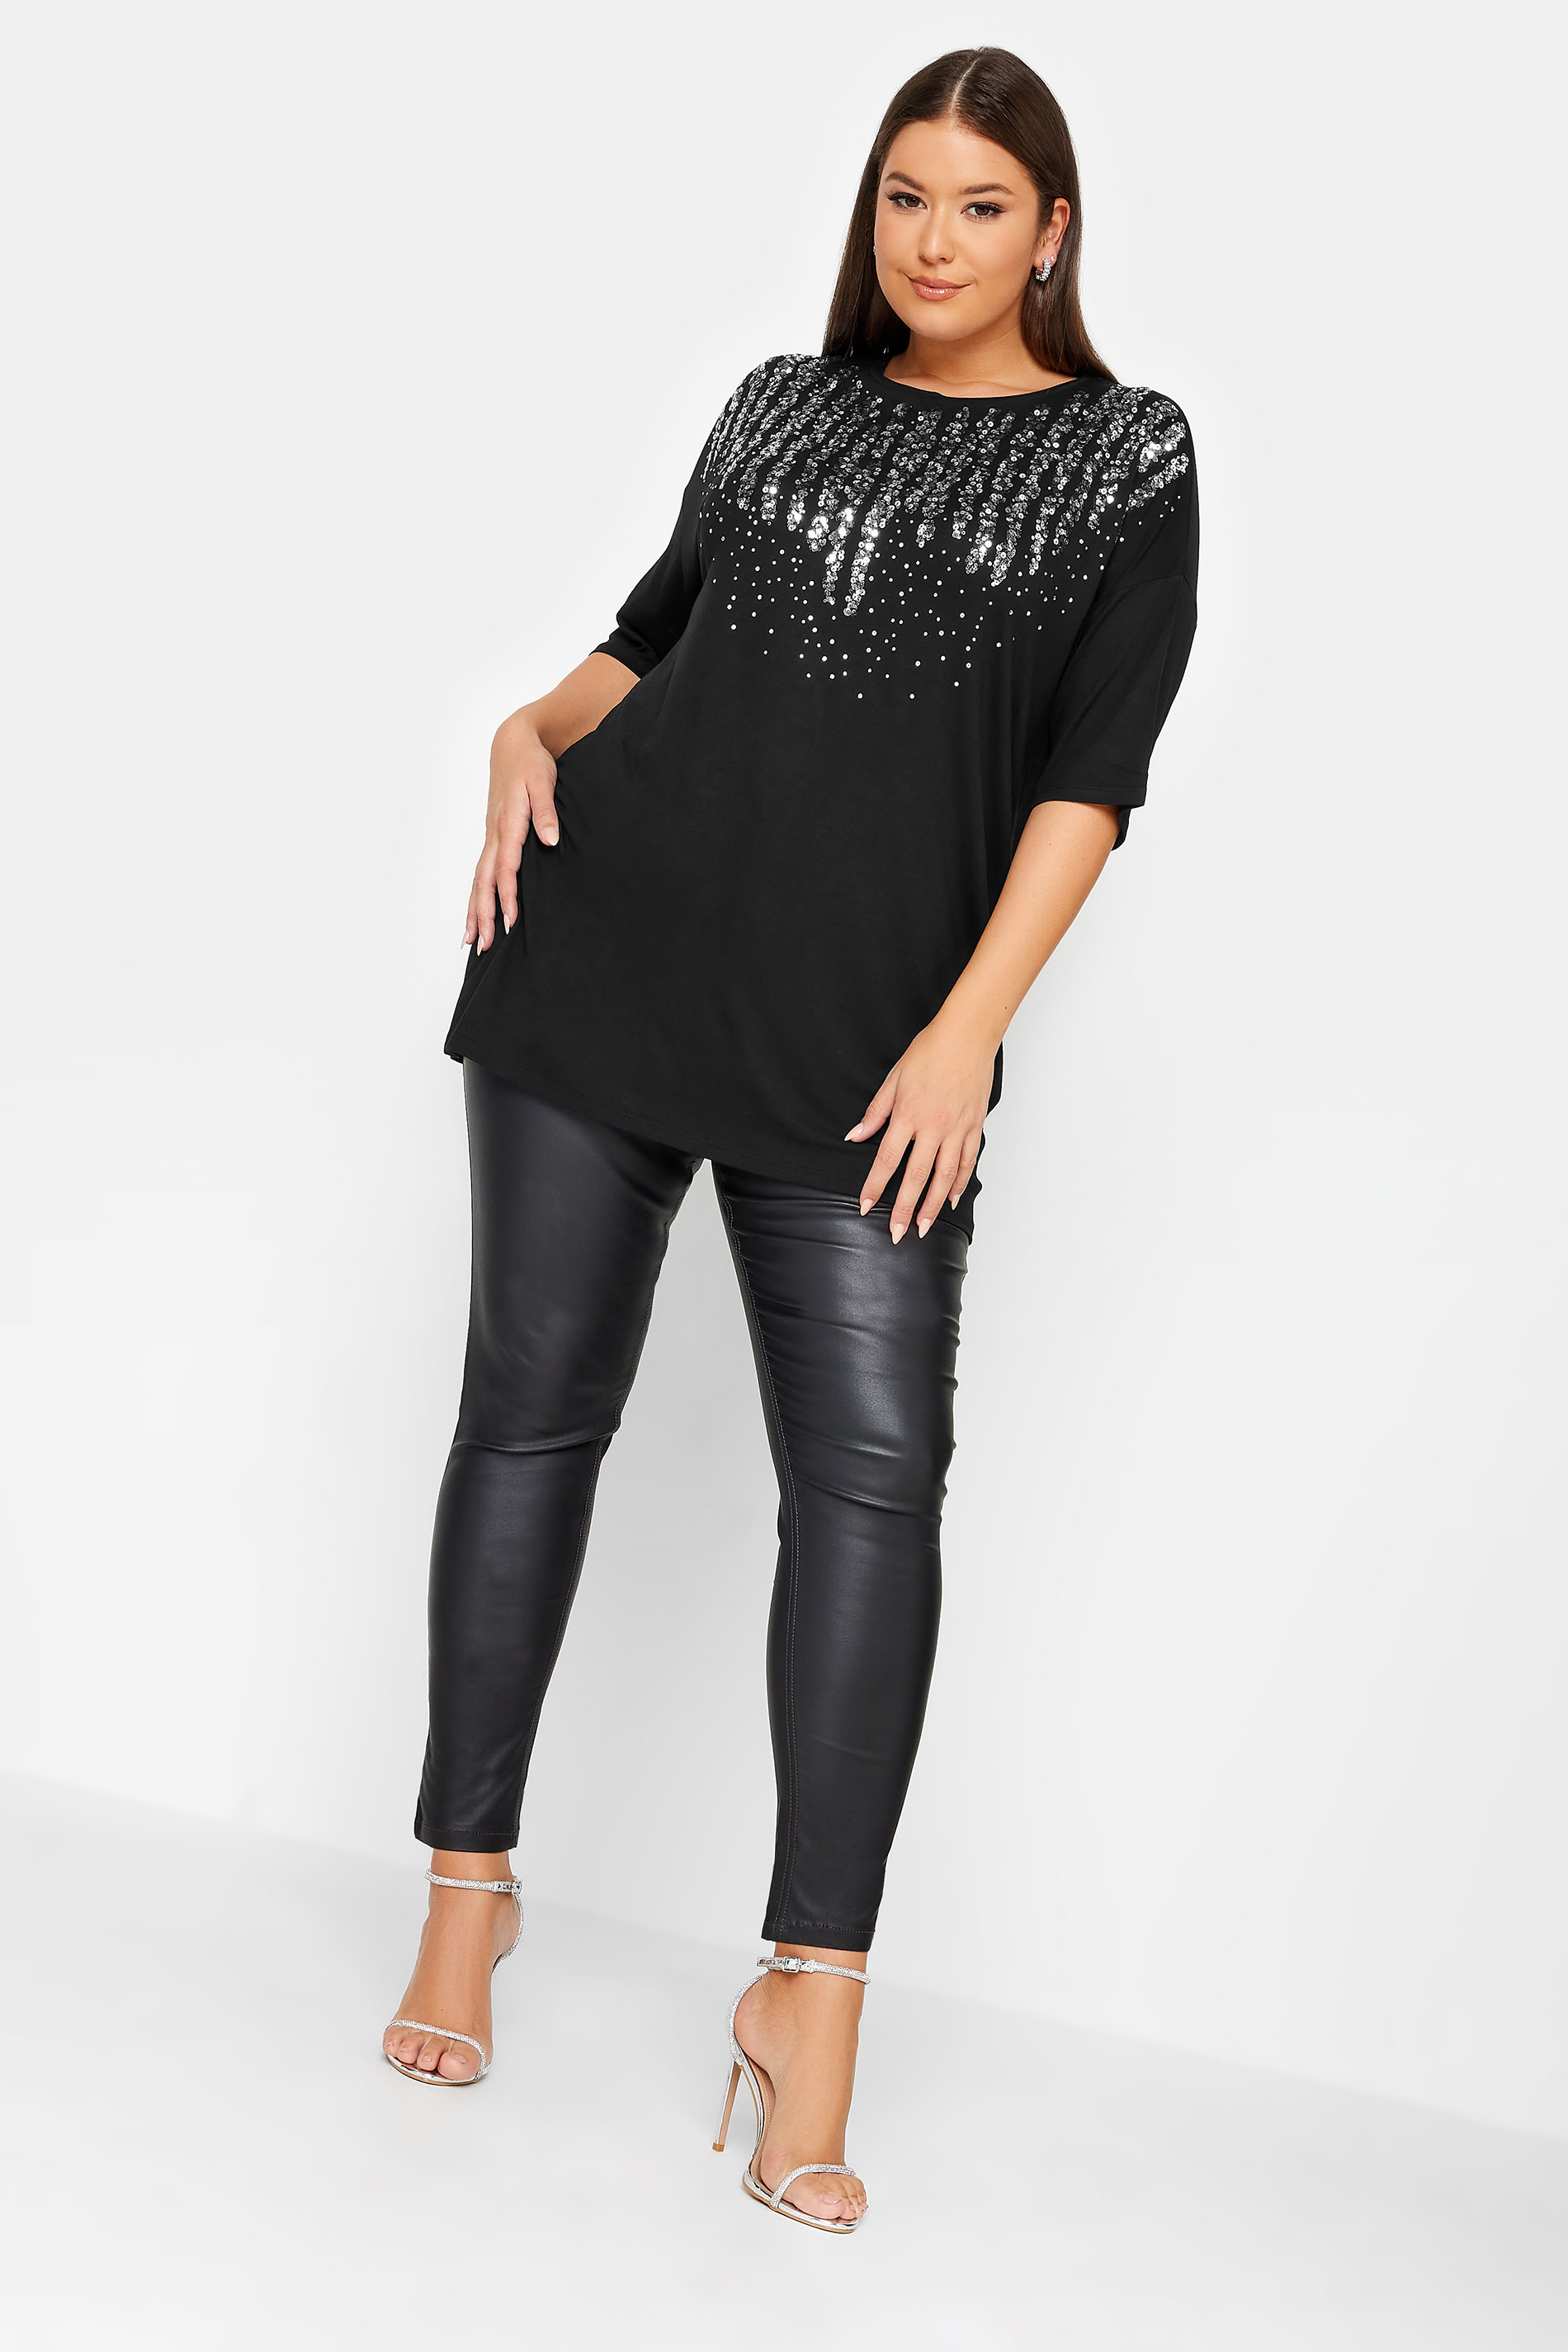 YOURS Plus Size Black Sequin Embellished Neckline T-Shirt | Yours Clothing 2